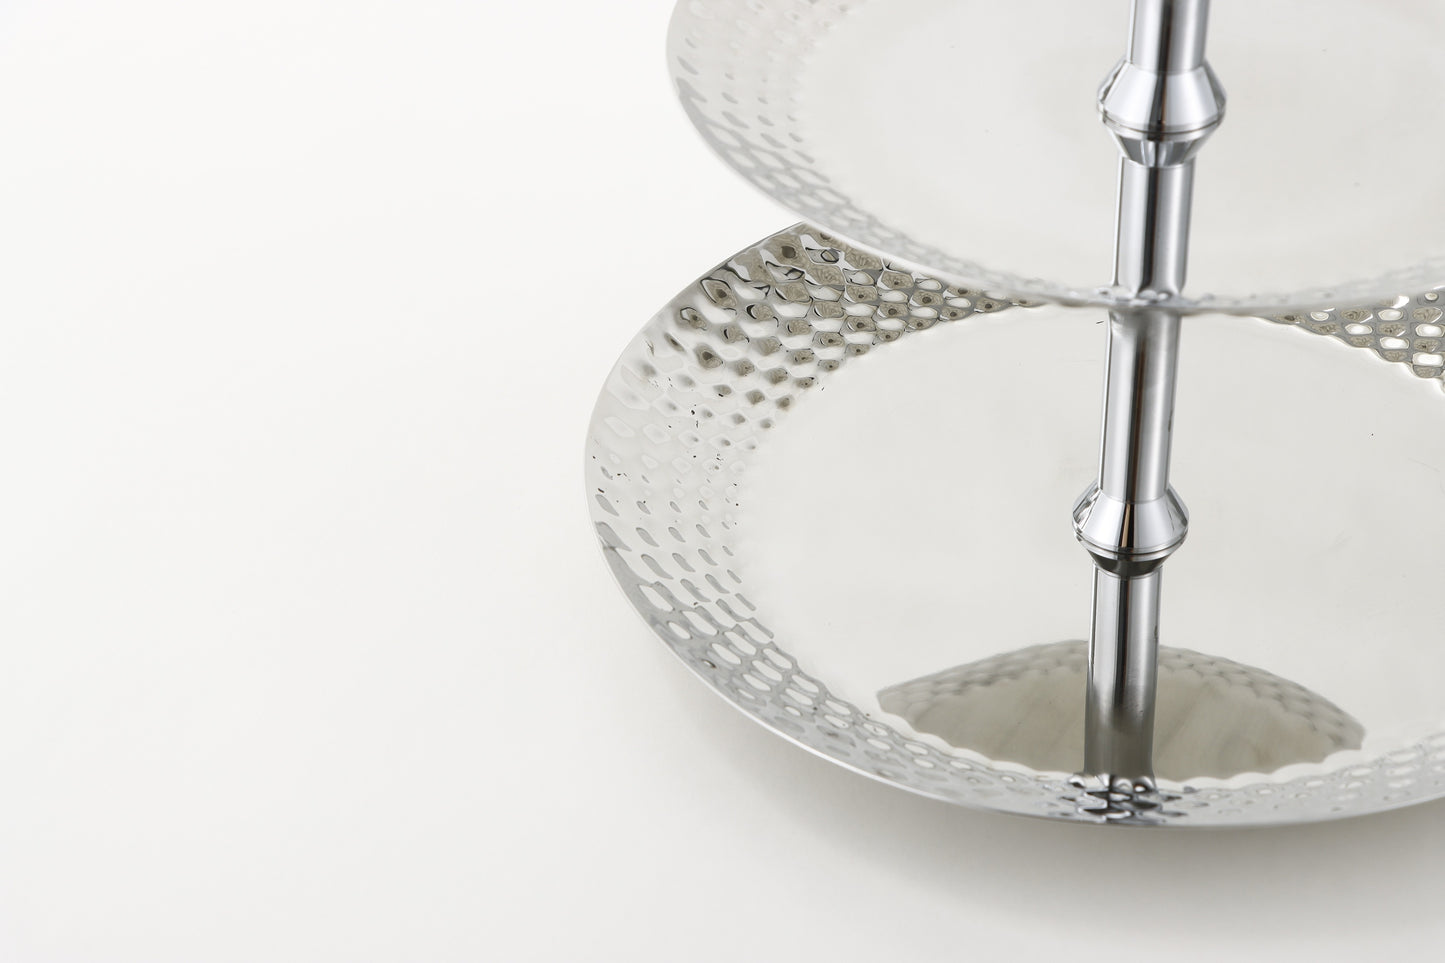 Silver S/S Steel & Aluminum Cake Stand